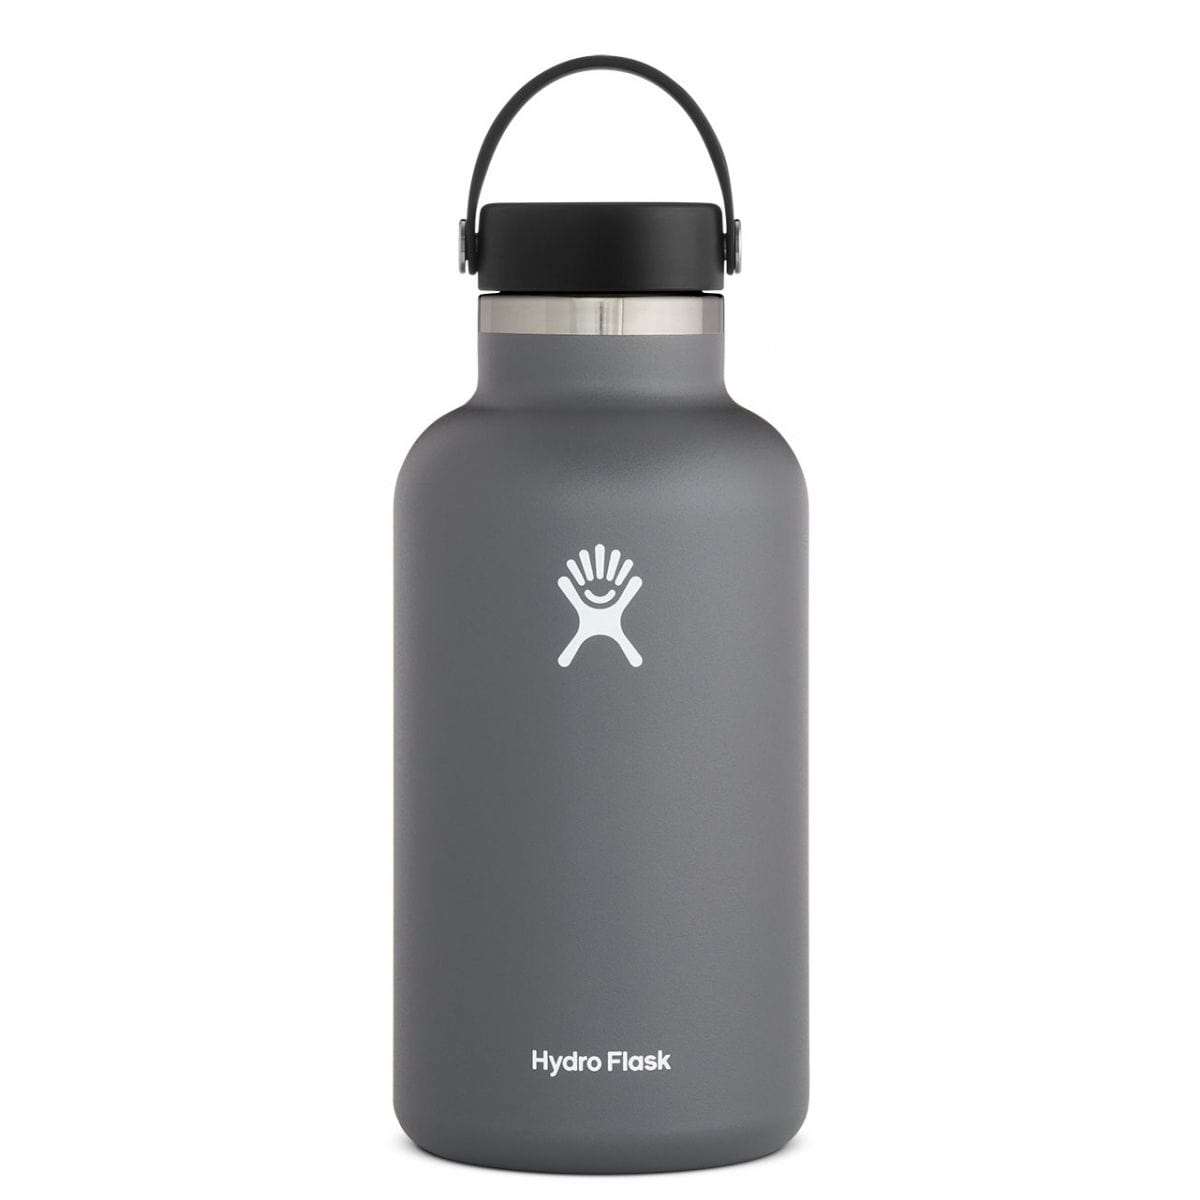 Hydro Flask Insulated Bottle Hydro Flask 64 oz Wide Mouth Bottle Stone